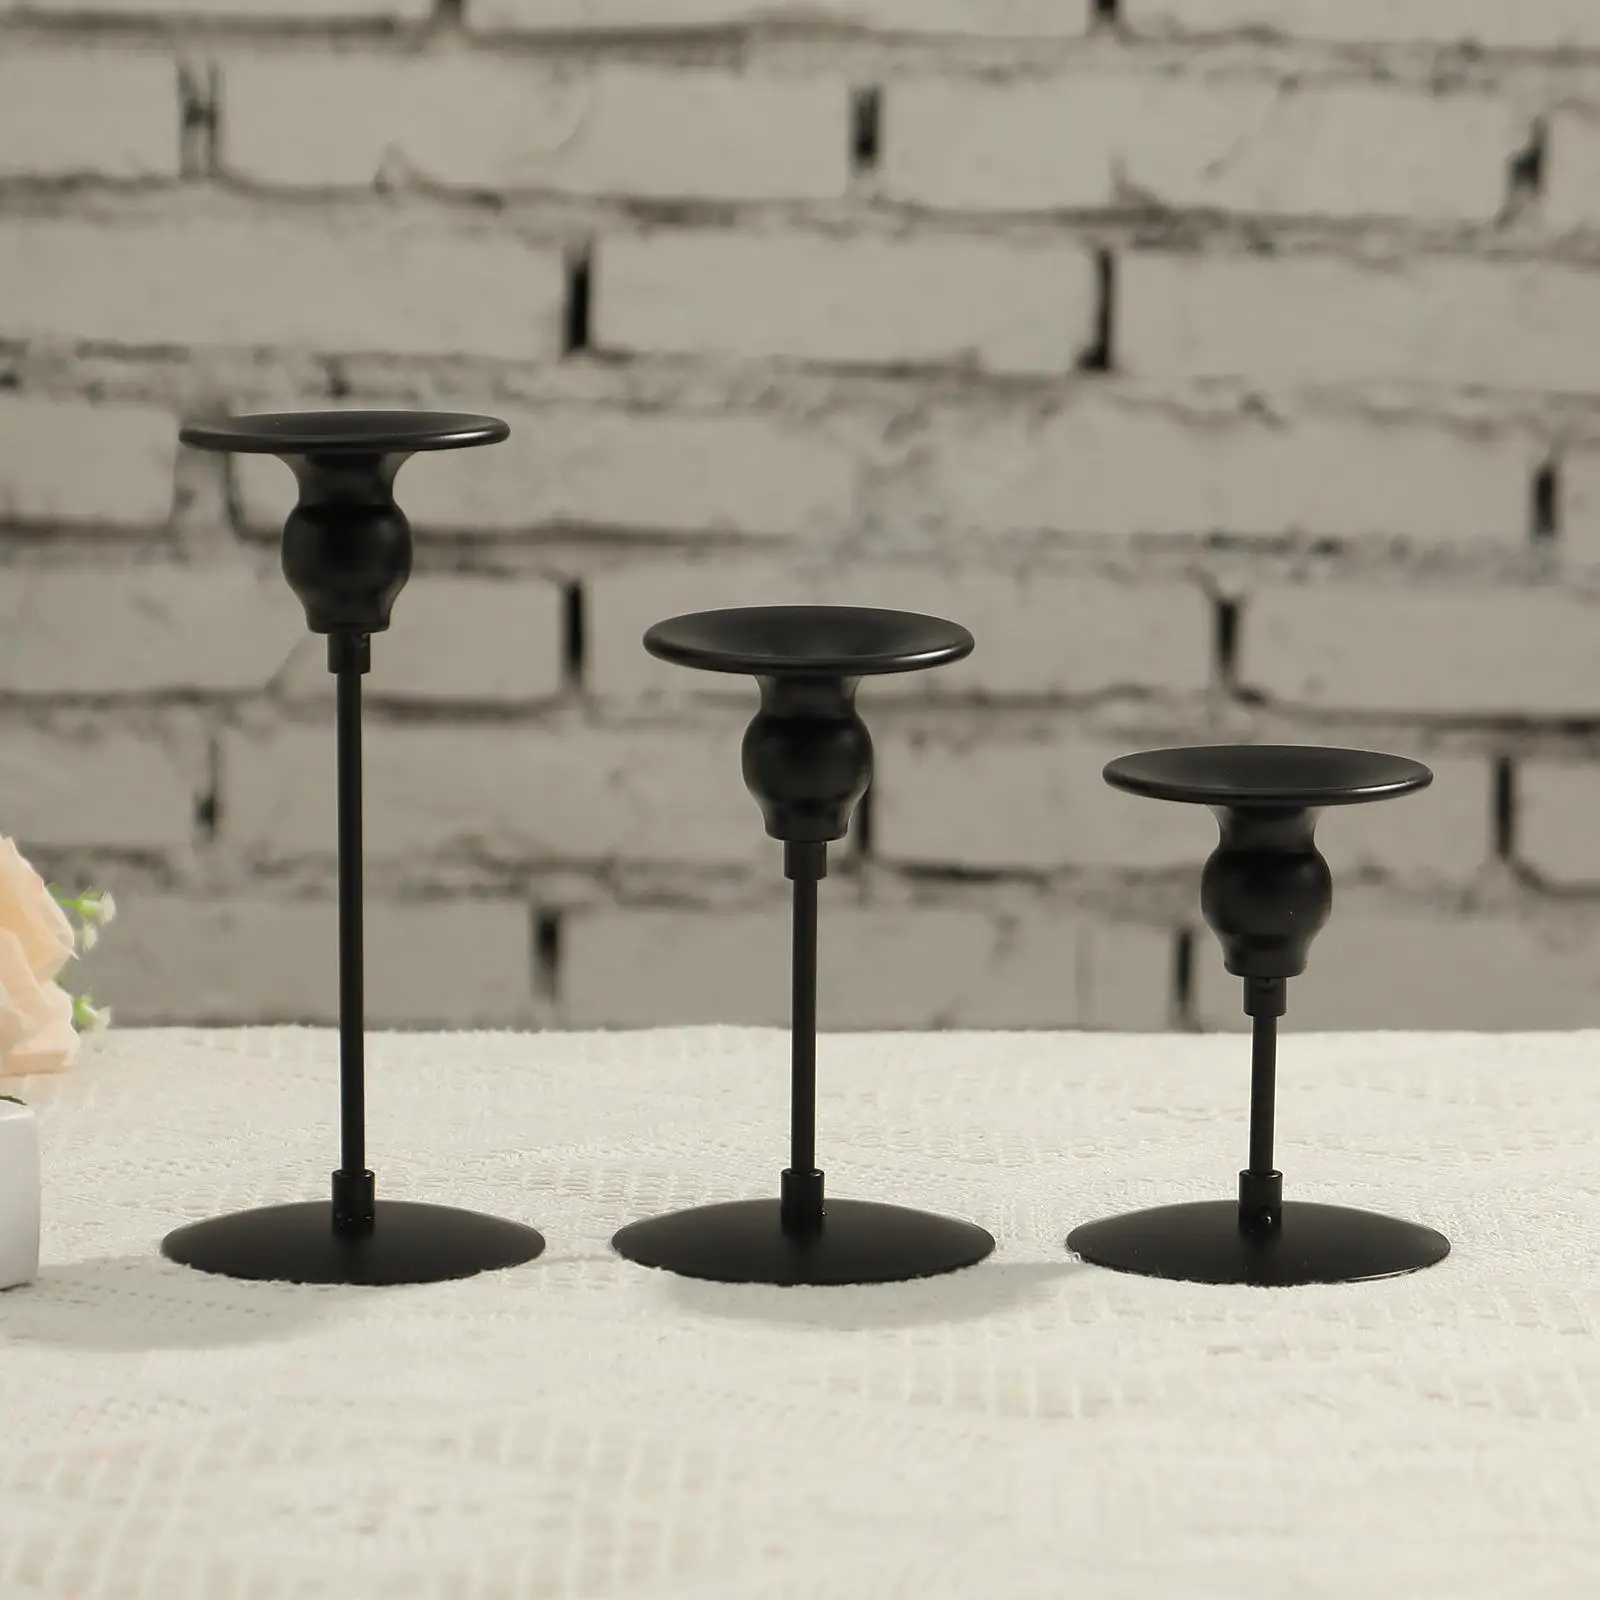 3Pcs Metal Candle Holders Black Candlestick Holders Pavilion Gift for Wedding Centerpieces Stable Base Adornment Decorative